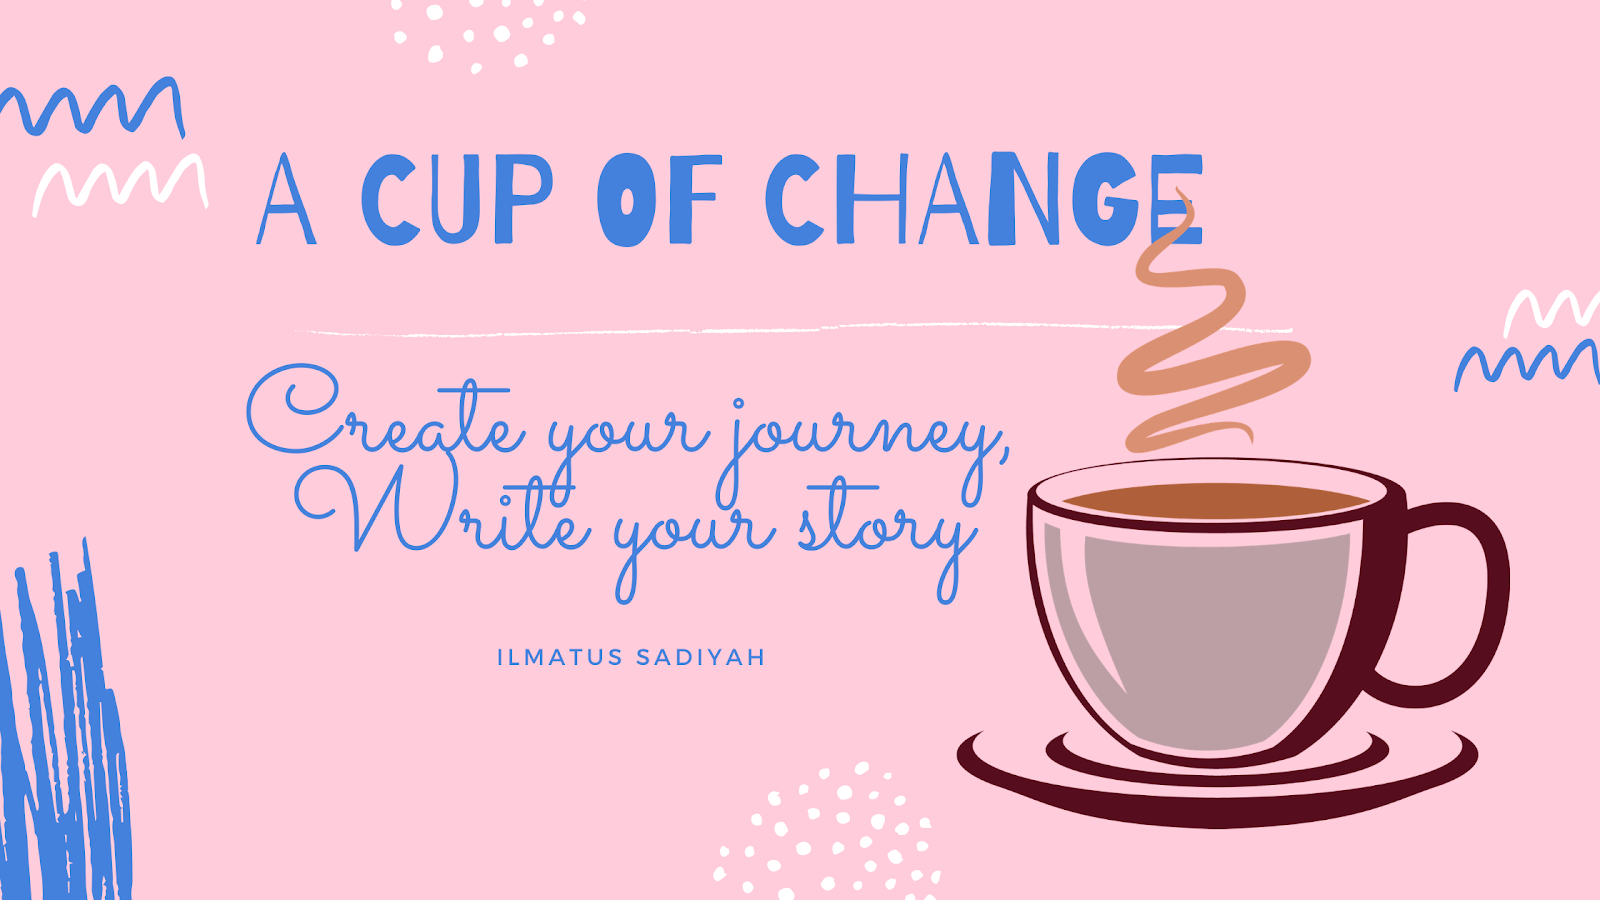 A CUP OF CHANGE